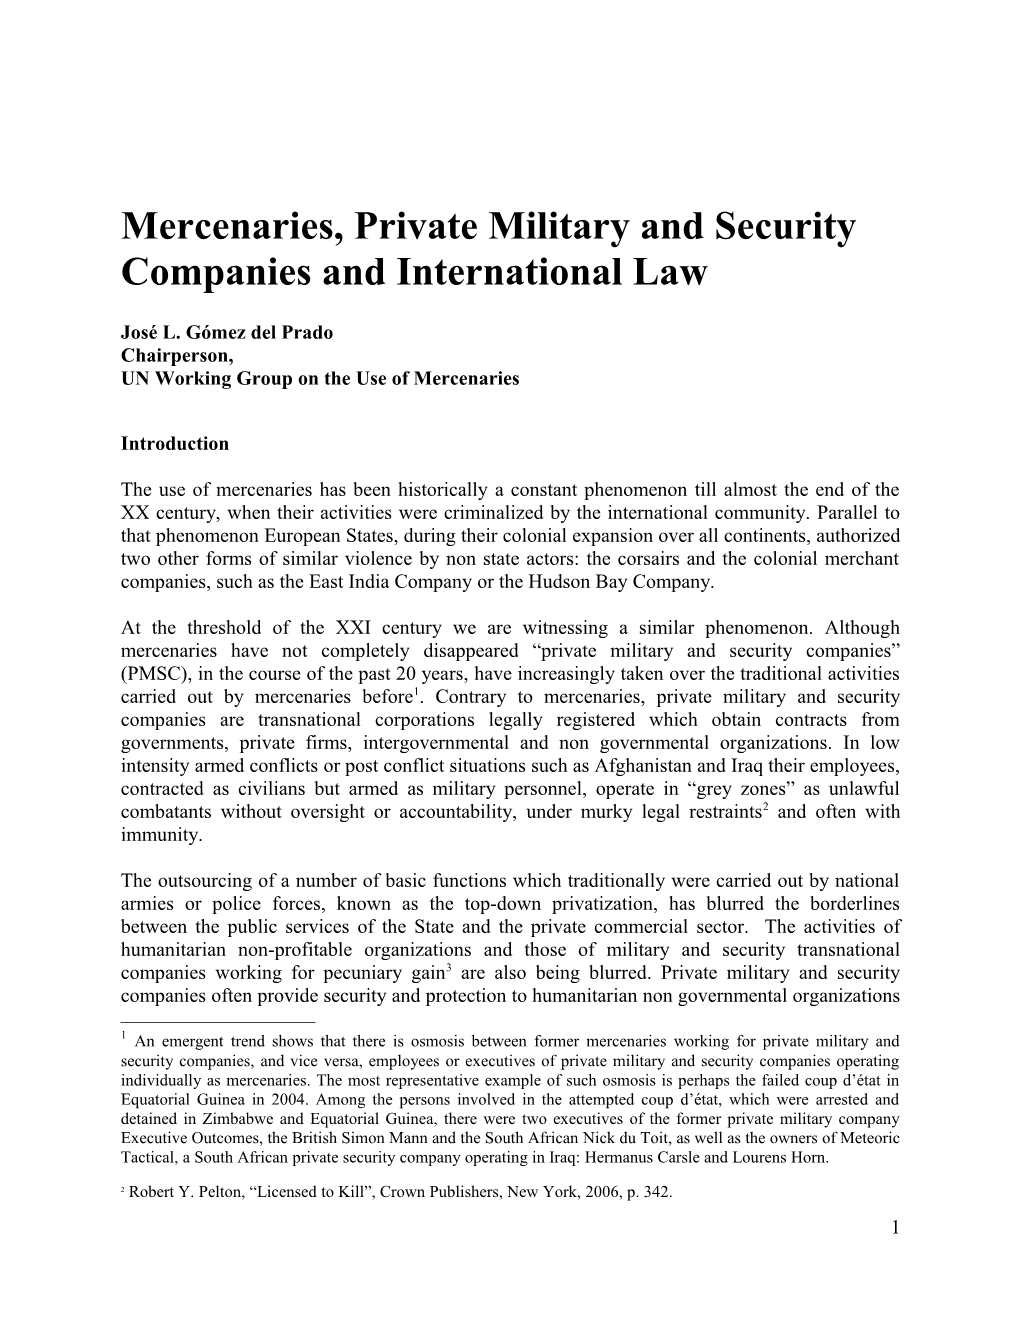 Mercenaries, Private Military and Security Companies and International Law